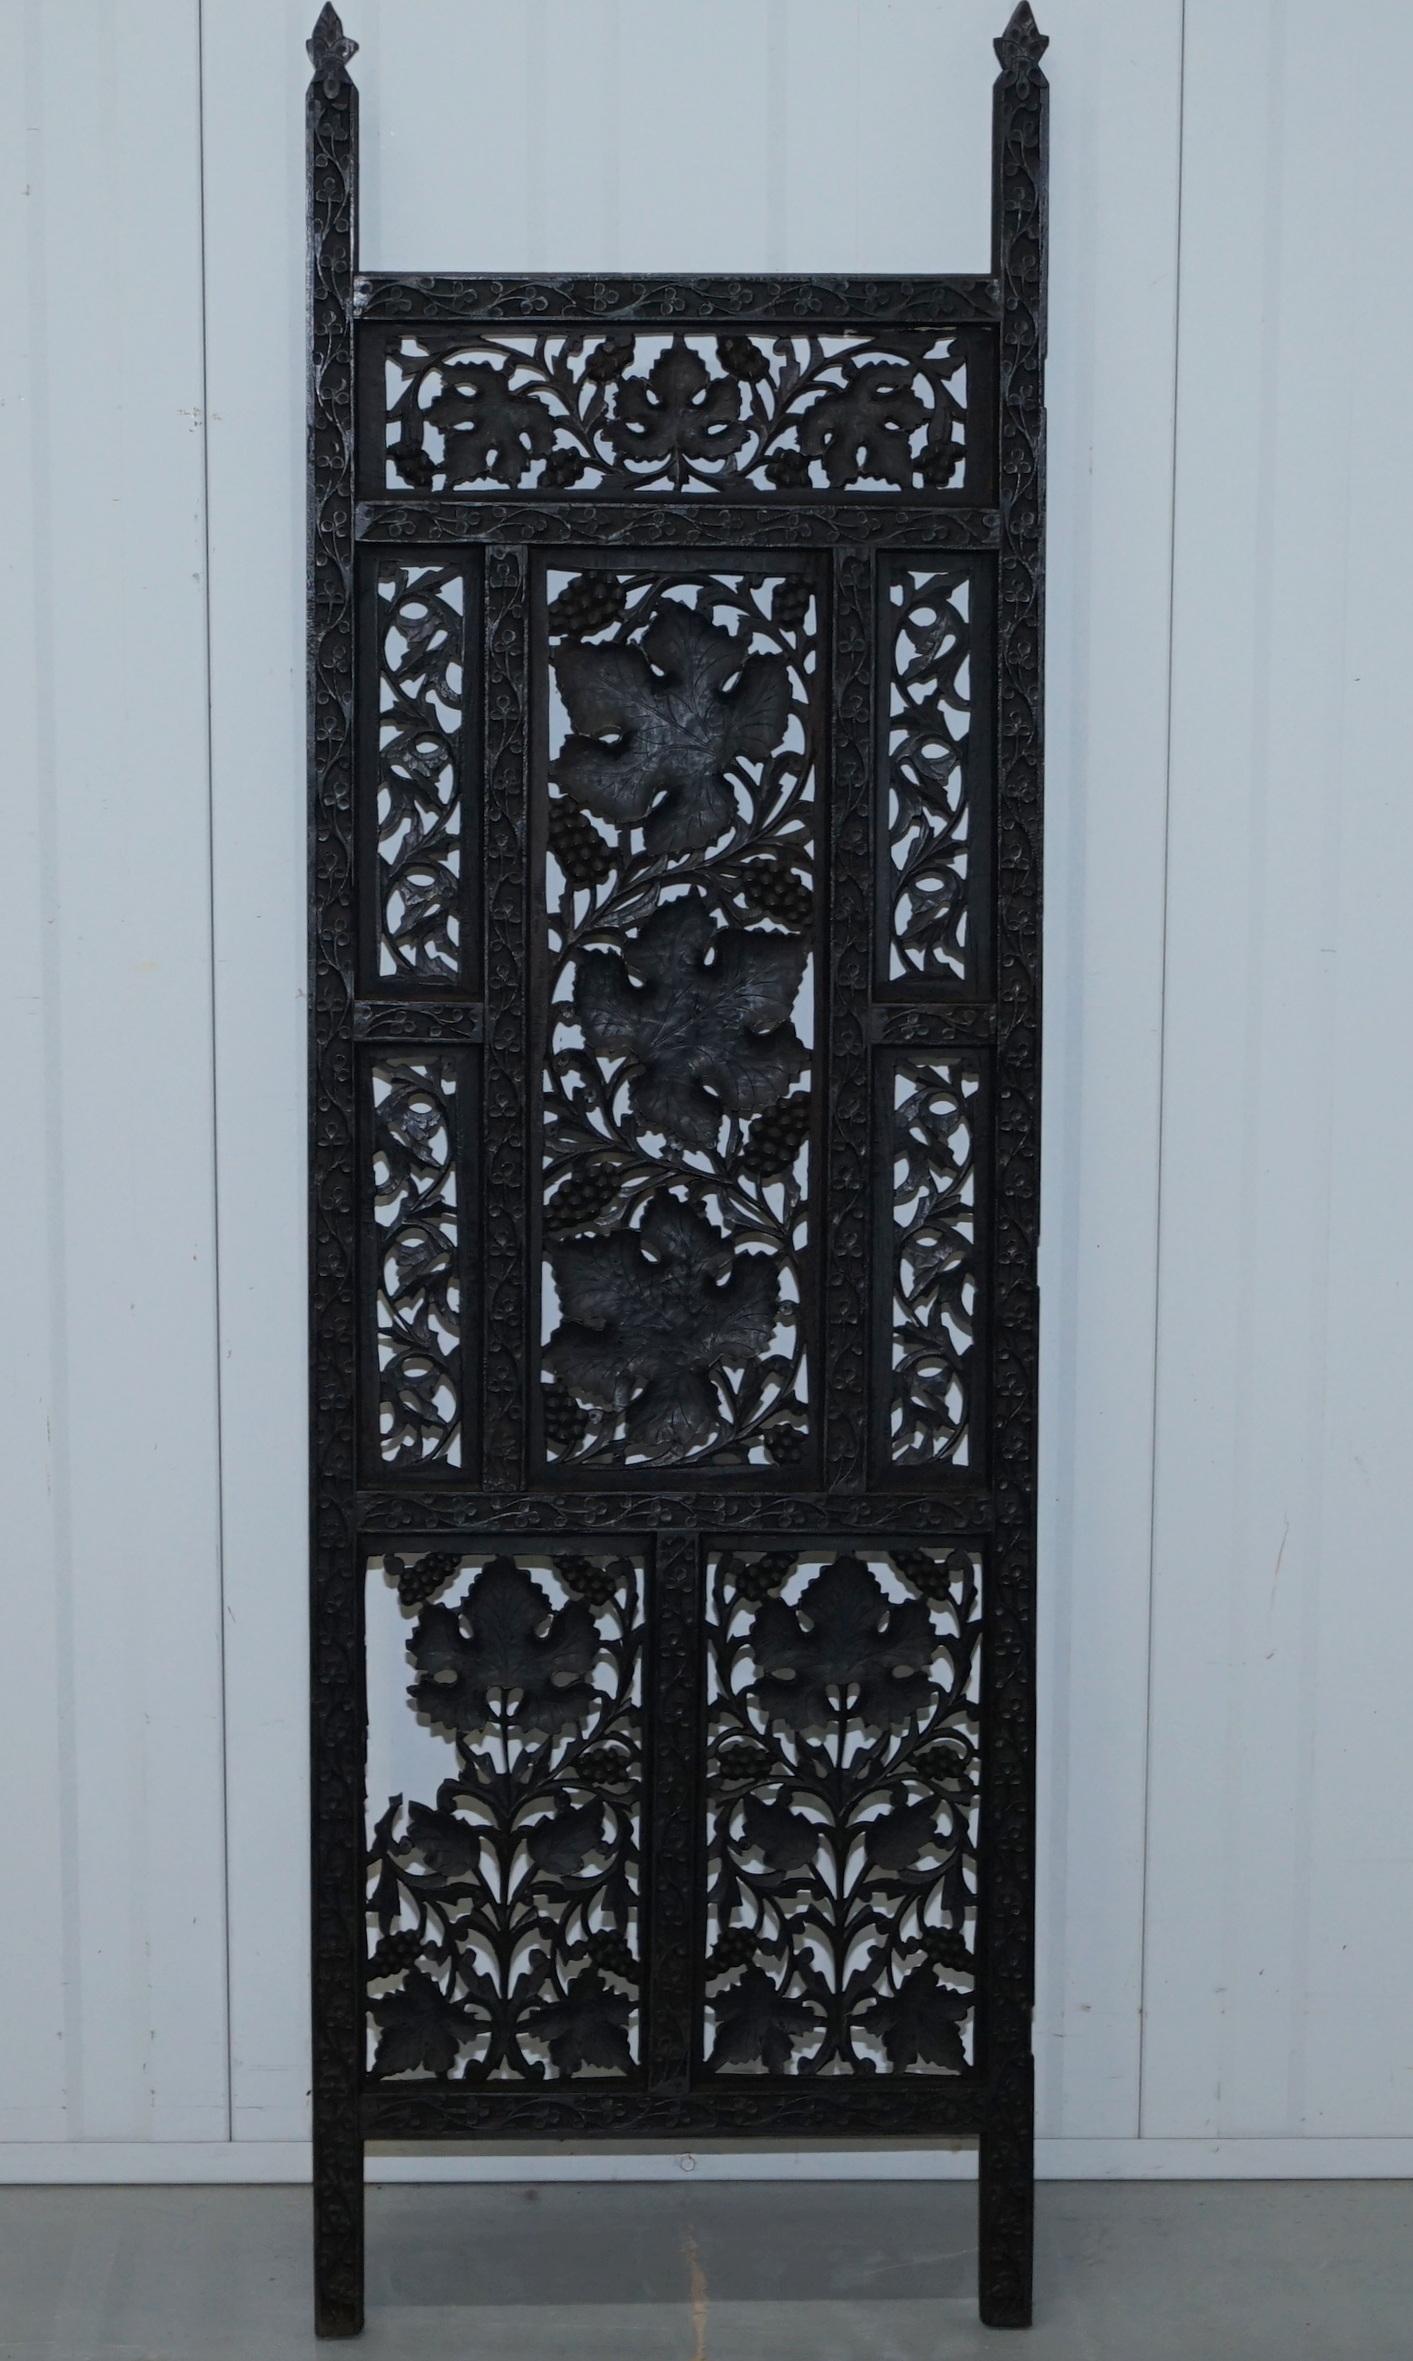 Rare Chinese Fretwork Carved Wall Panels Depicting Leaves Solid Teak Art Wood 9